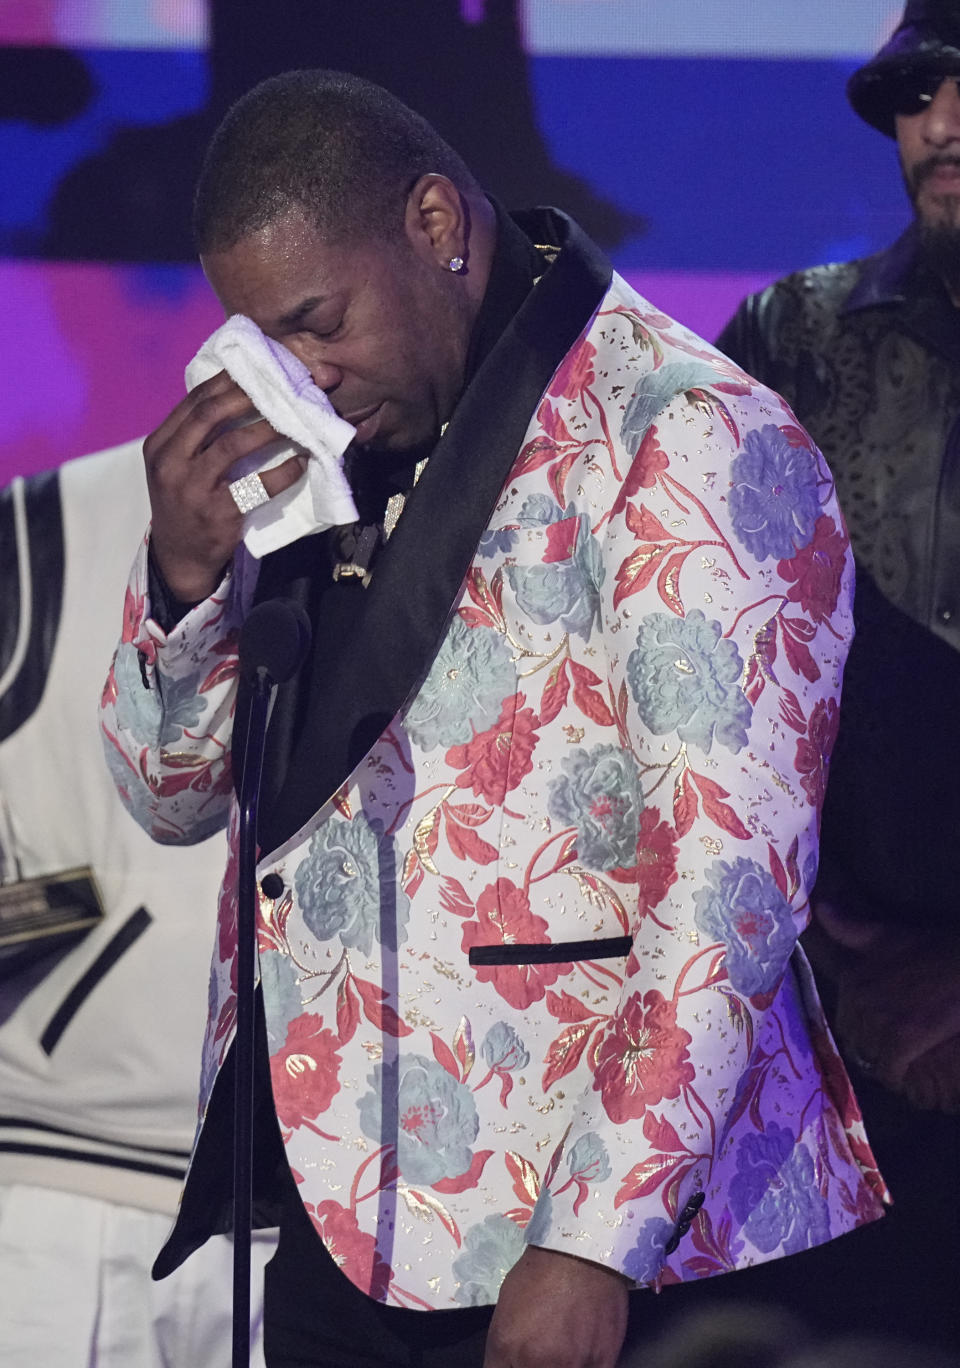 Busta Rhymes reacts onstage as he accepts the lifetime achievement award at the BET Awards on Sunday, June 25, 2023, at the Microsoft Theater in Los Angeles. (AP Photo/Mark Terrill)